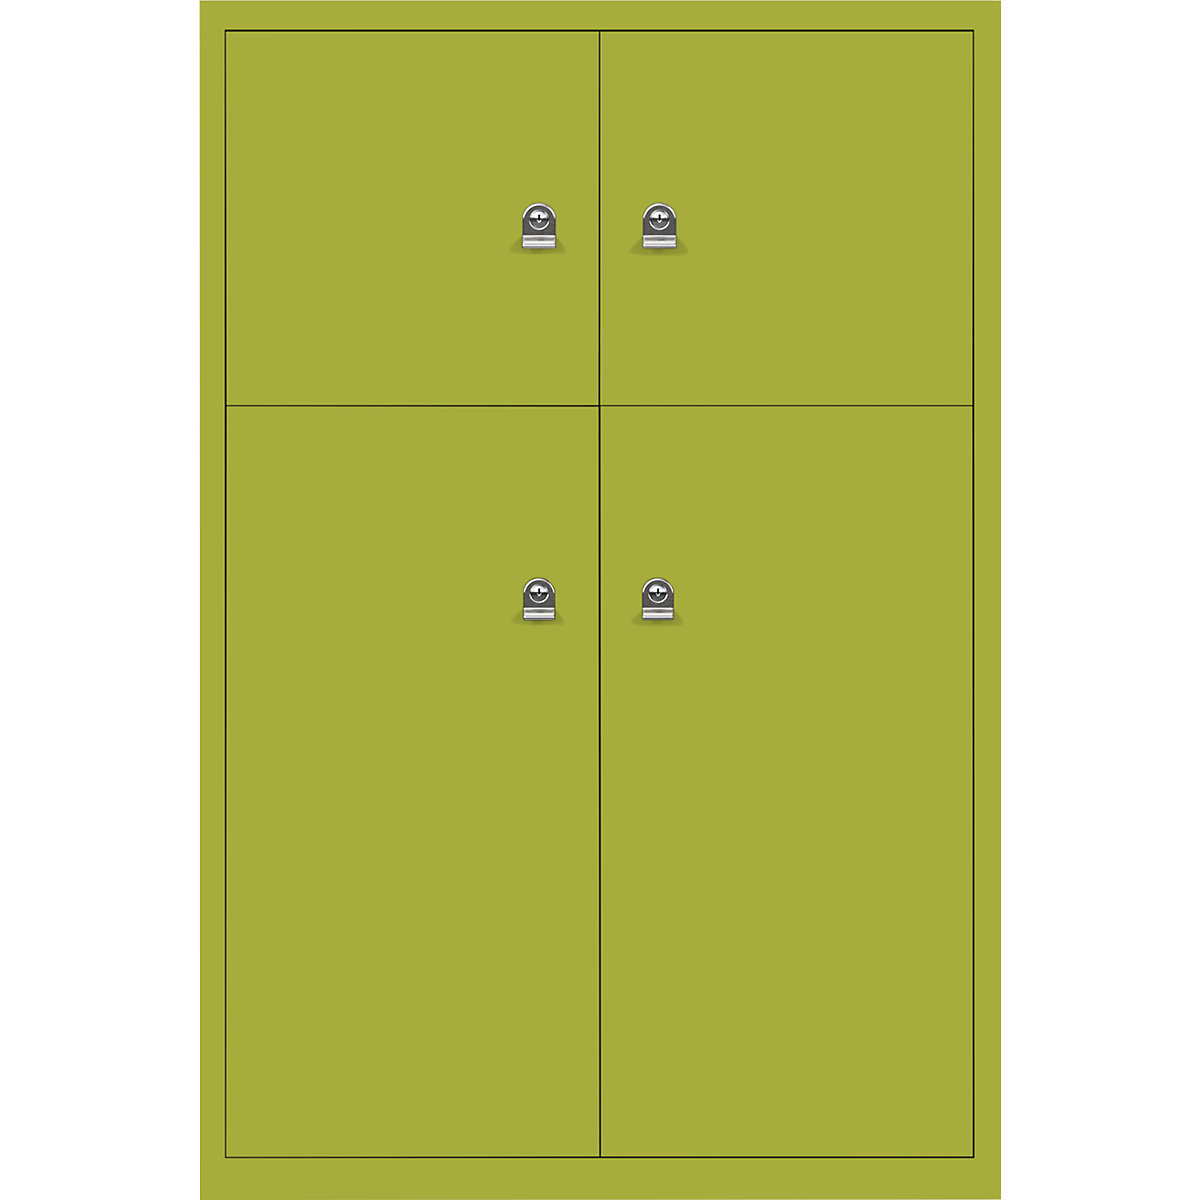 BISLEY – LateralFile™ lodge, with 4 lockable compartments, height 2 x 375 mm, 2 x 755 mm, green